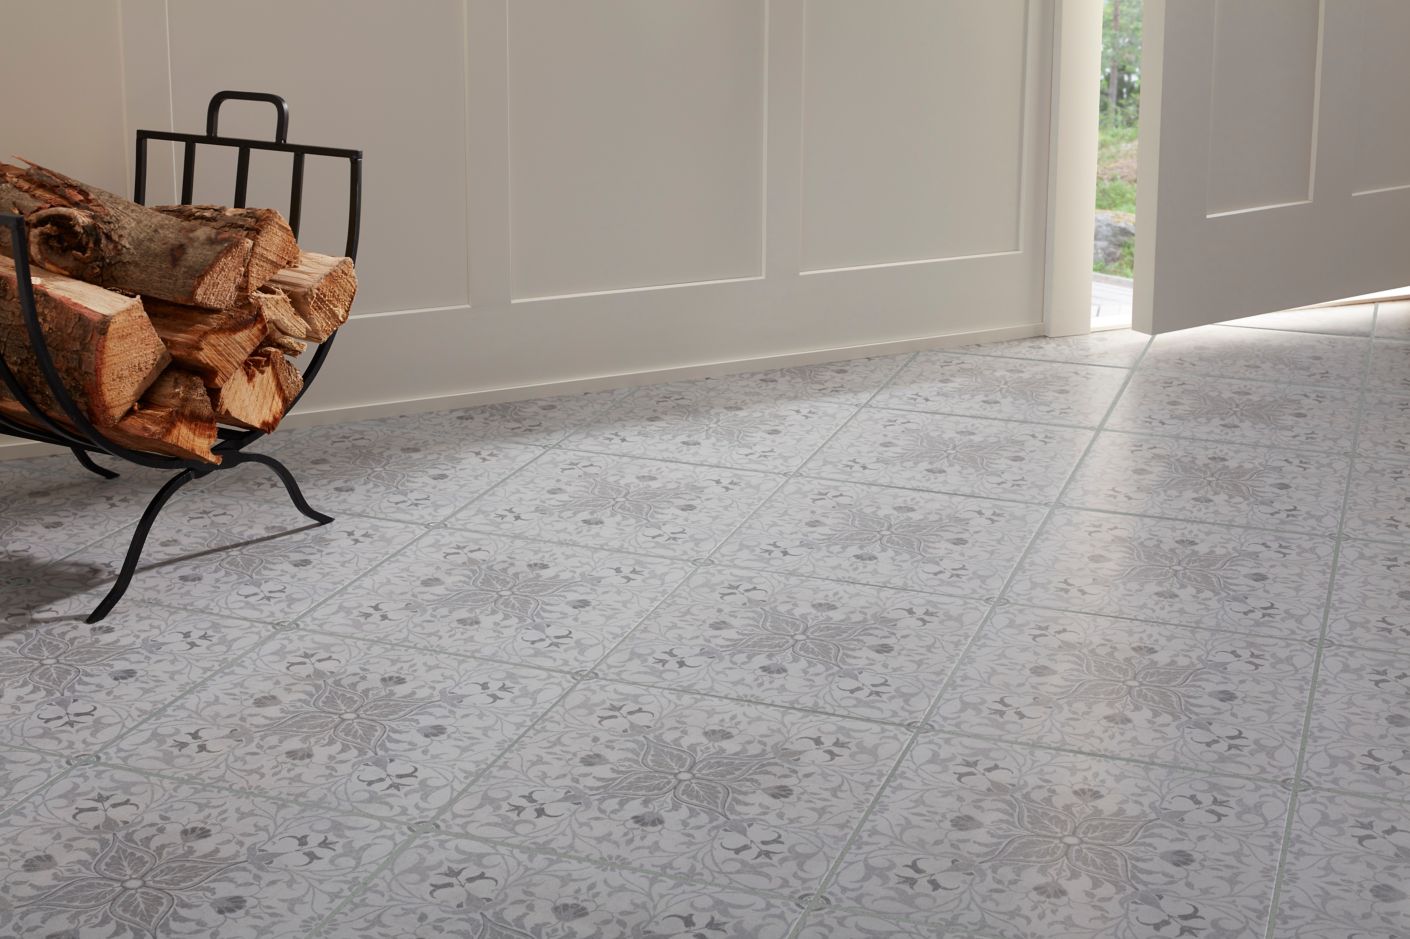 Detail view of home entryway with grey floral patterned floor tile and fireplace log carrier.